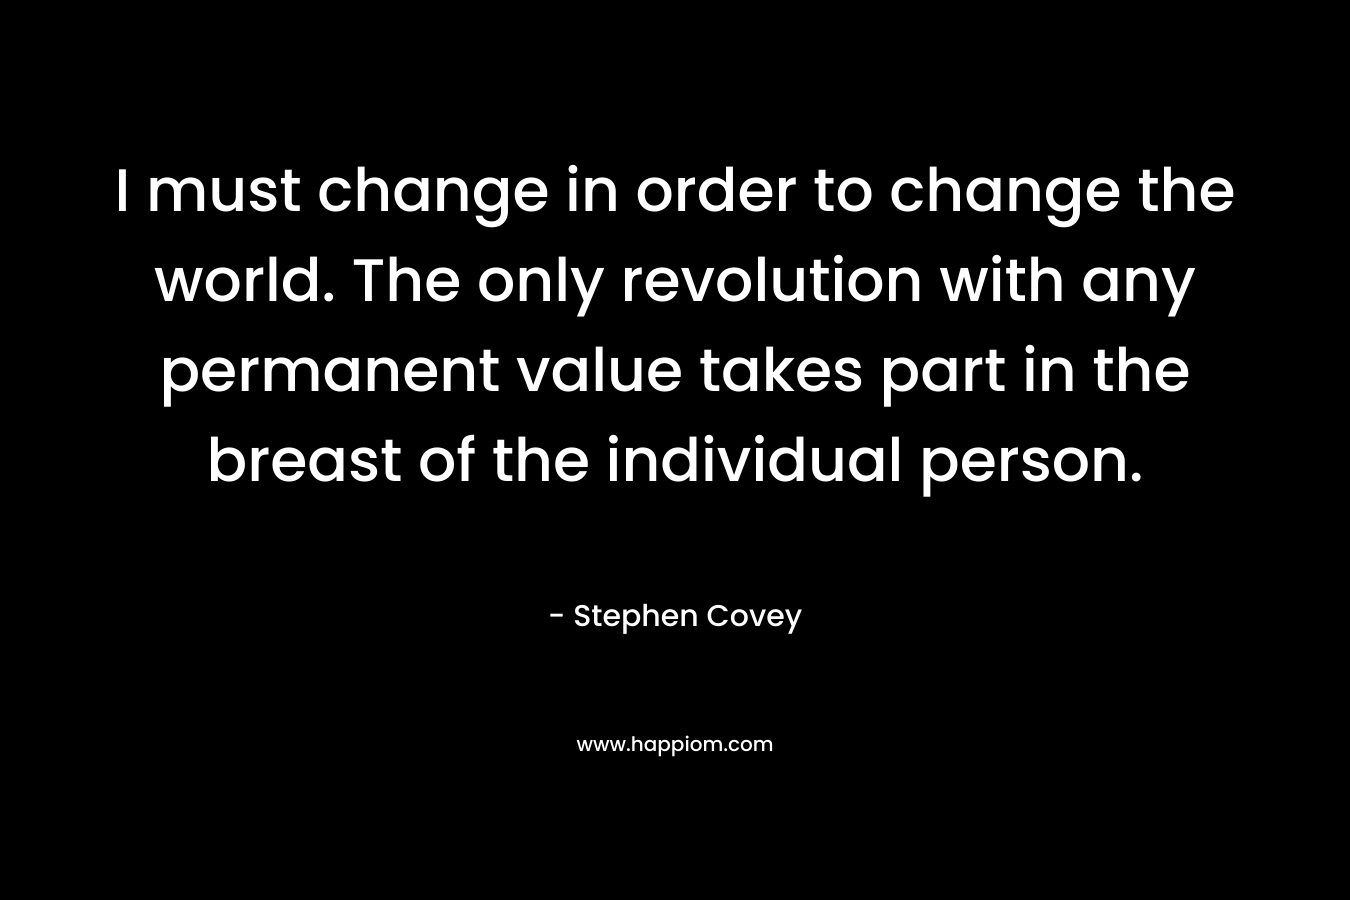 I must change in order to change the world. The only revolution with any permanent value takes part in the breast of the individual person. – Stephen Covey